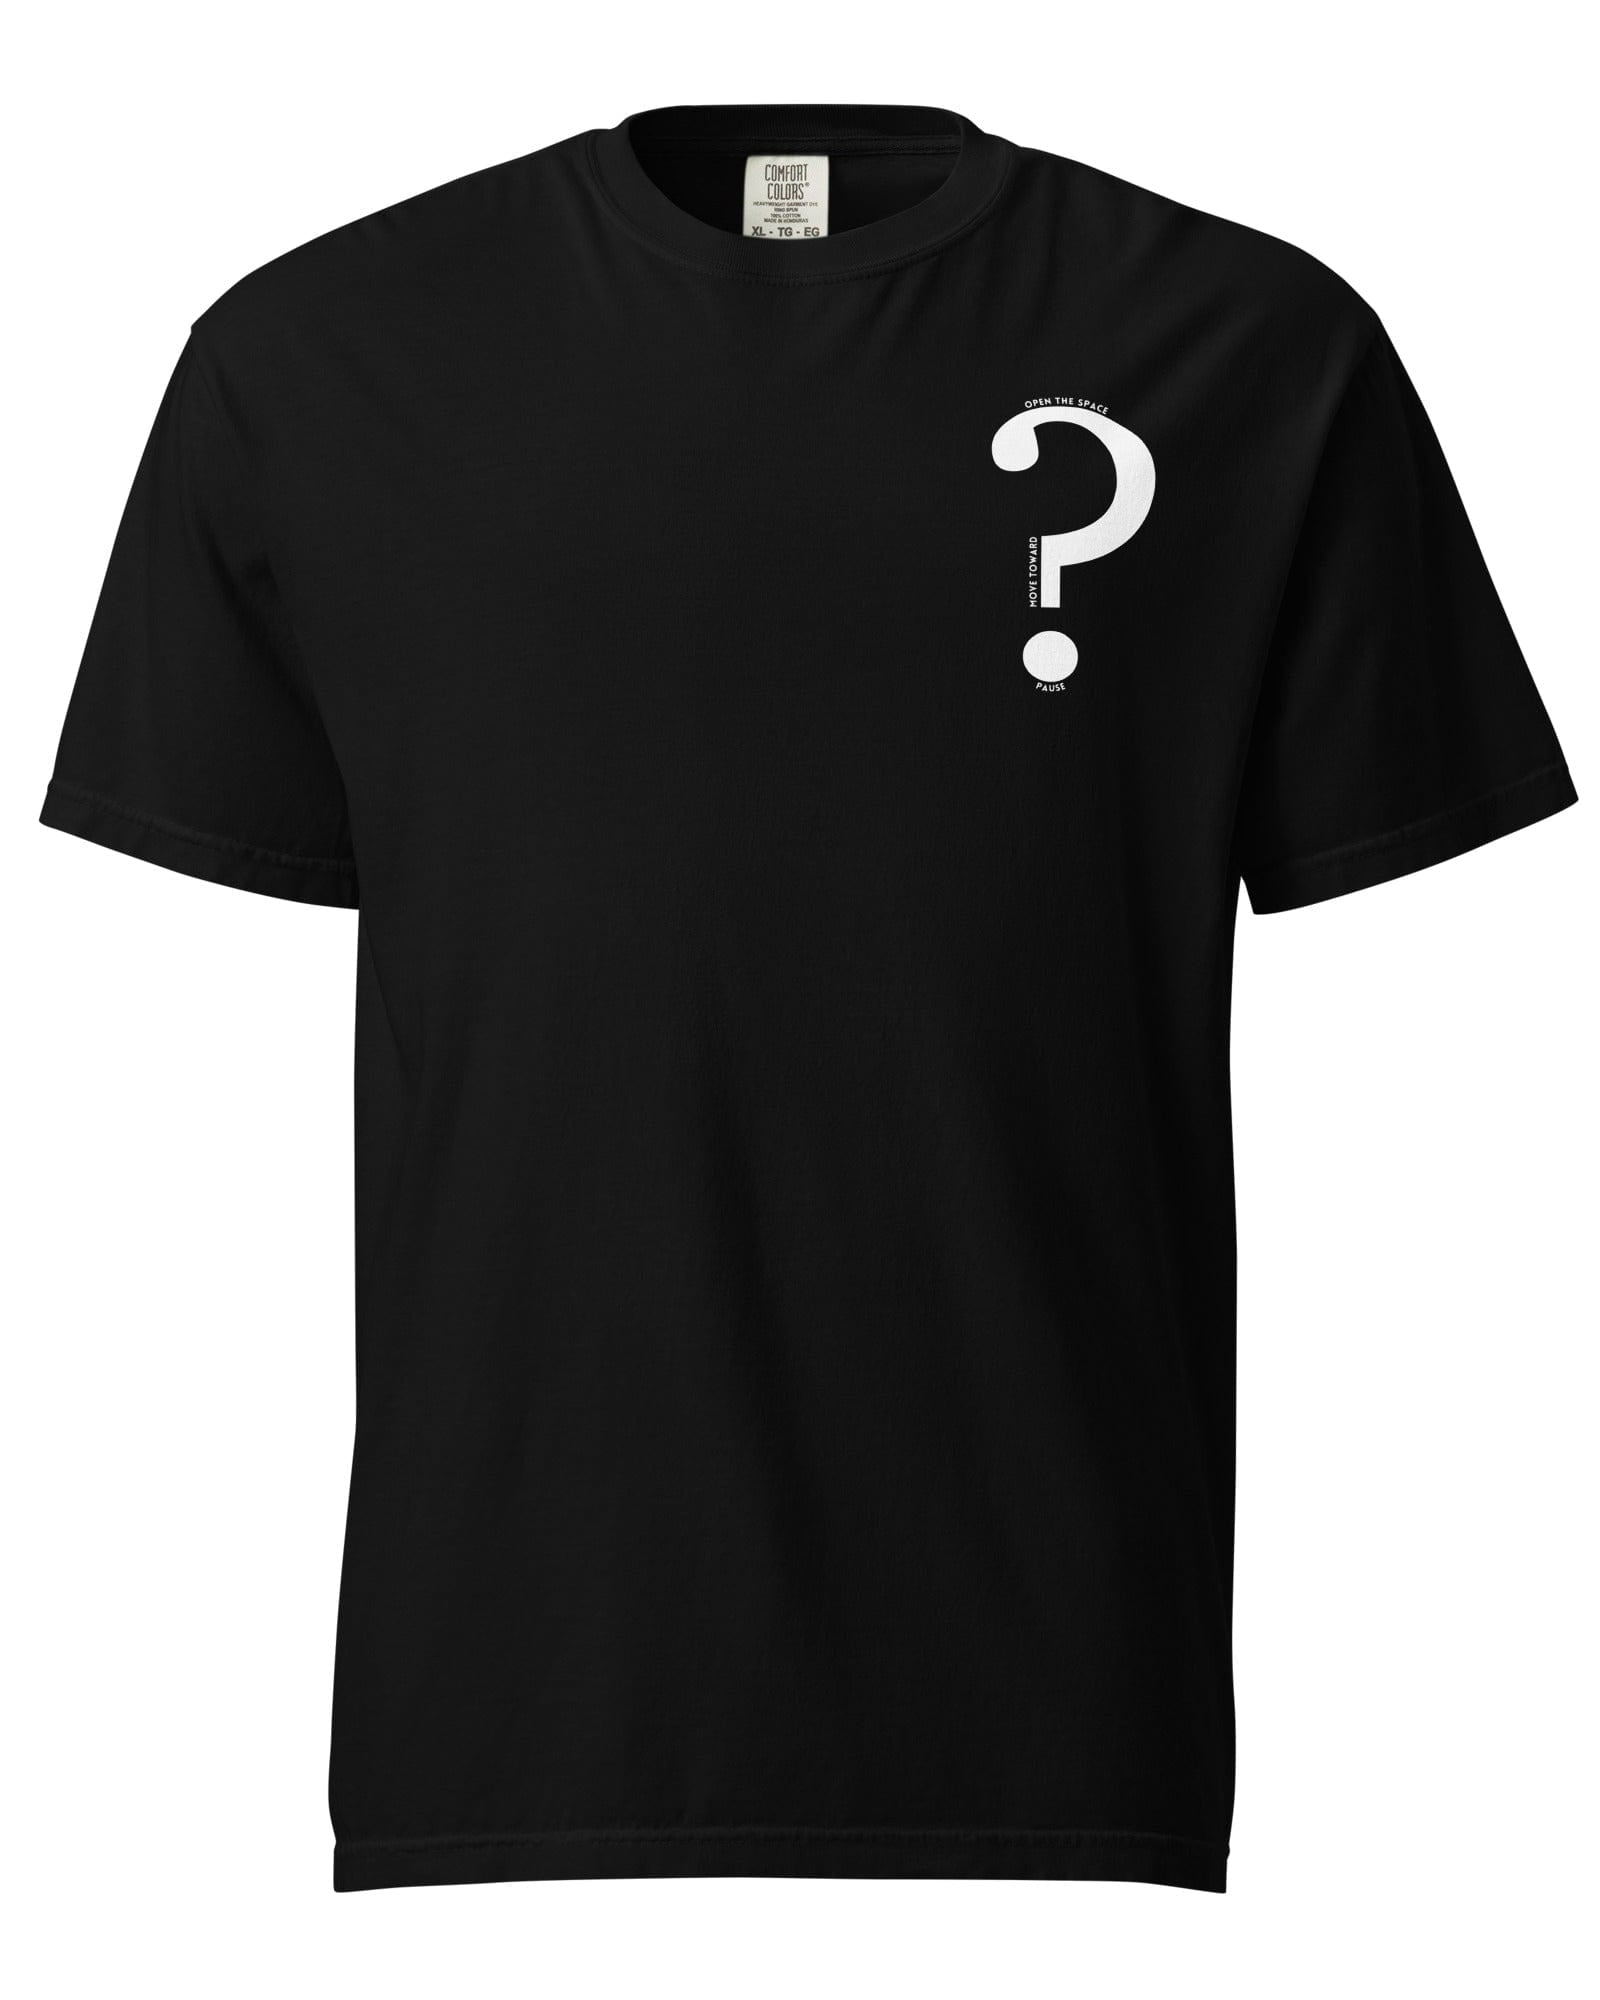 Question Mark: Pause, Move Toward, Open the Space | T-shirt Black / S Shirts & Tops Jolly & Goode